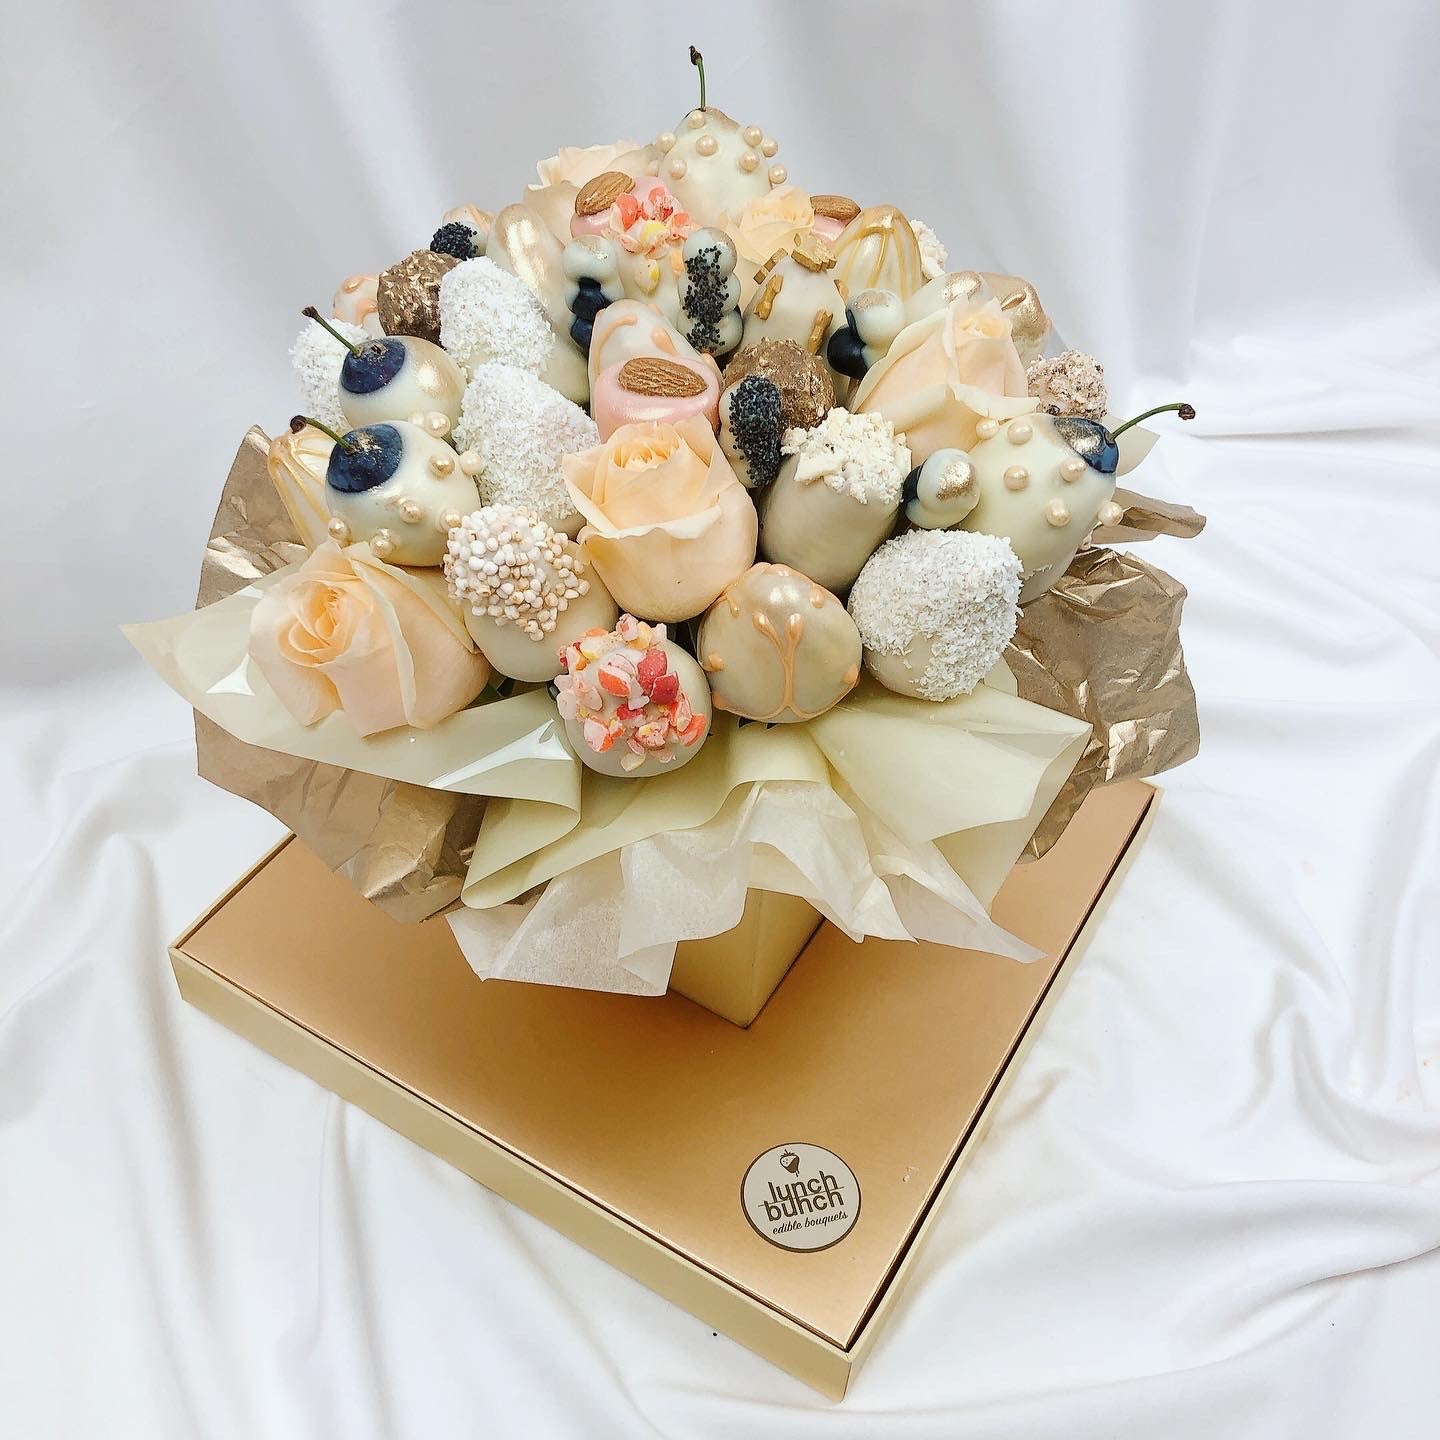 Engagement Gift, chocolate strawberries Bouquet, Romantig gift, engagement present, white chocolate bouquet, dessert gift adelaide delivery